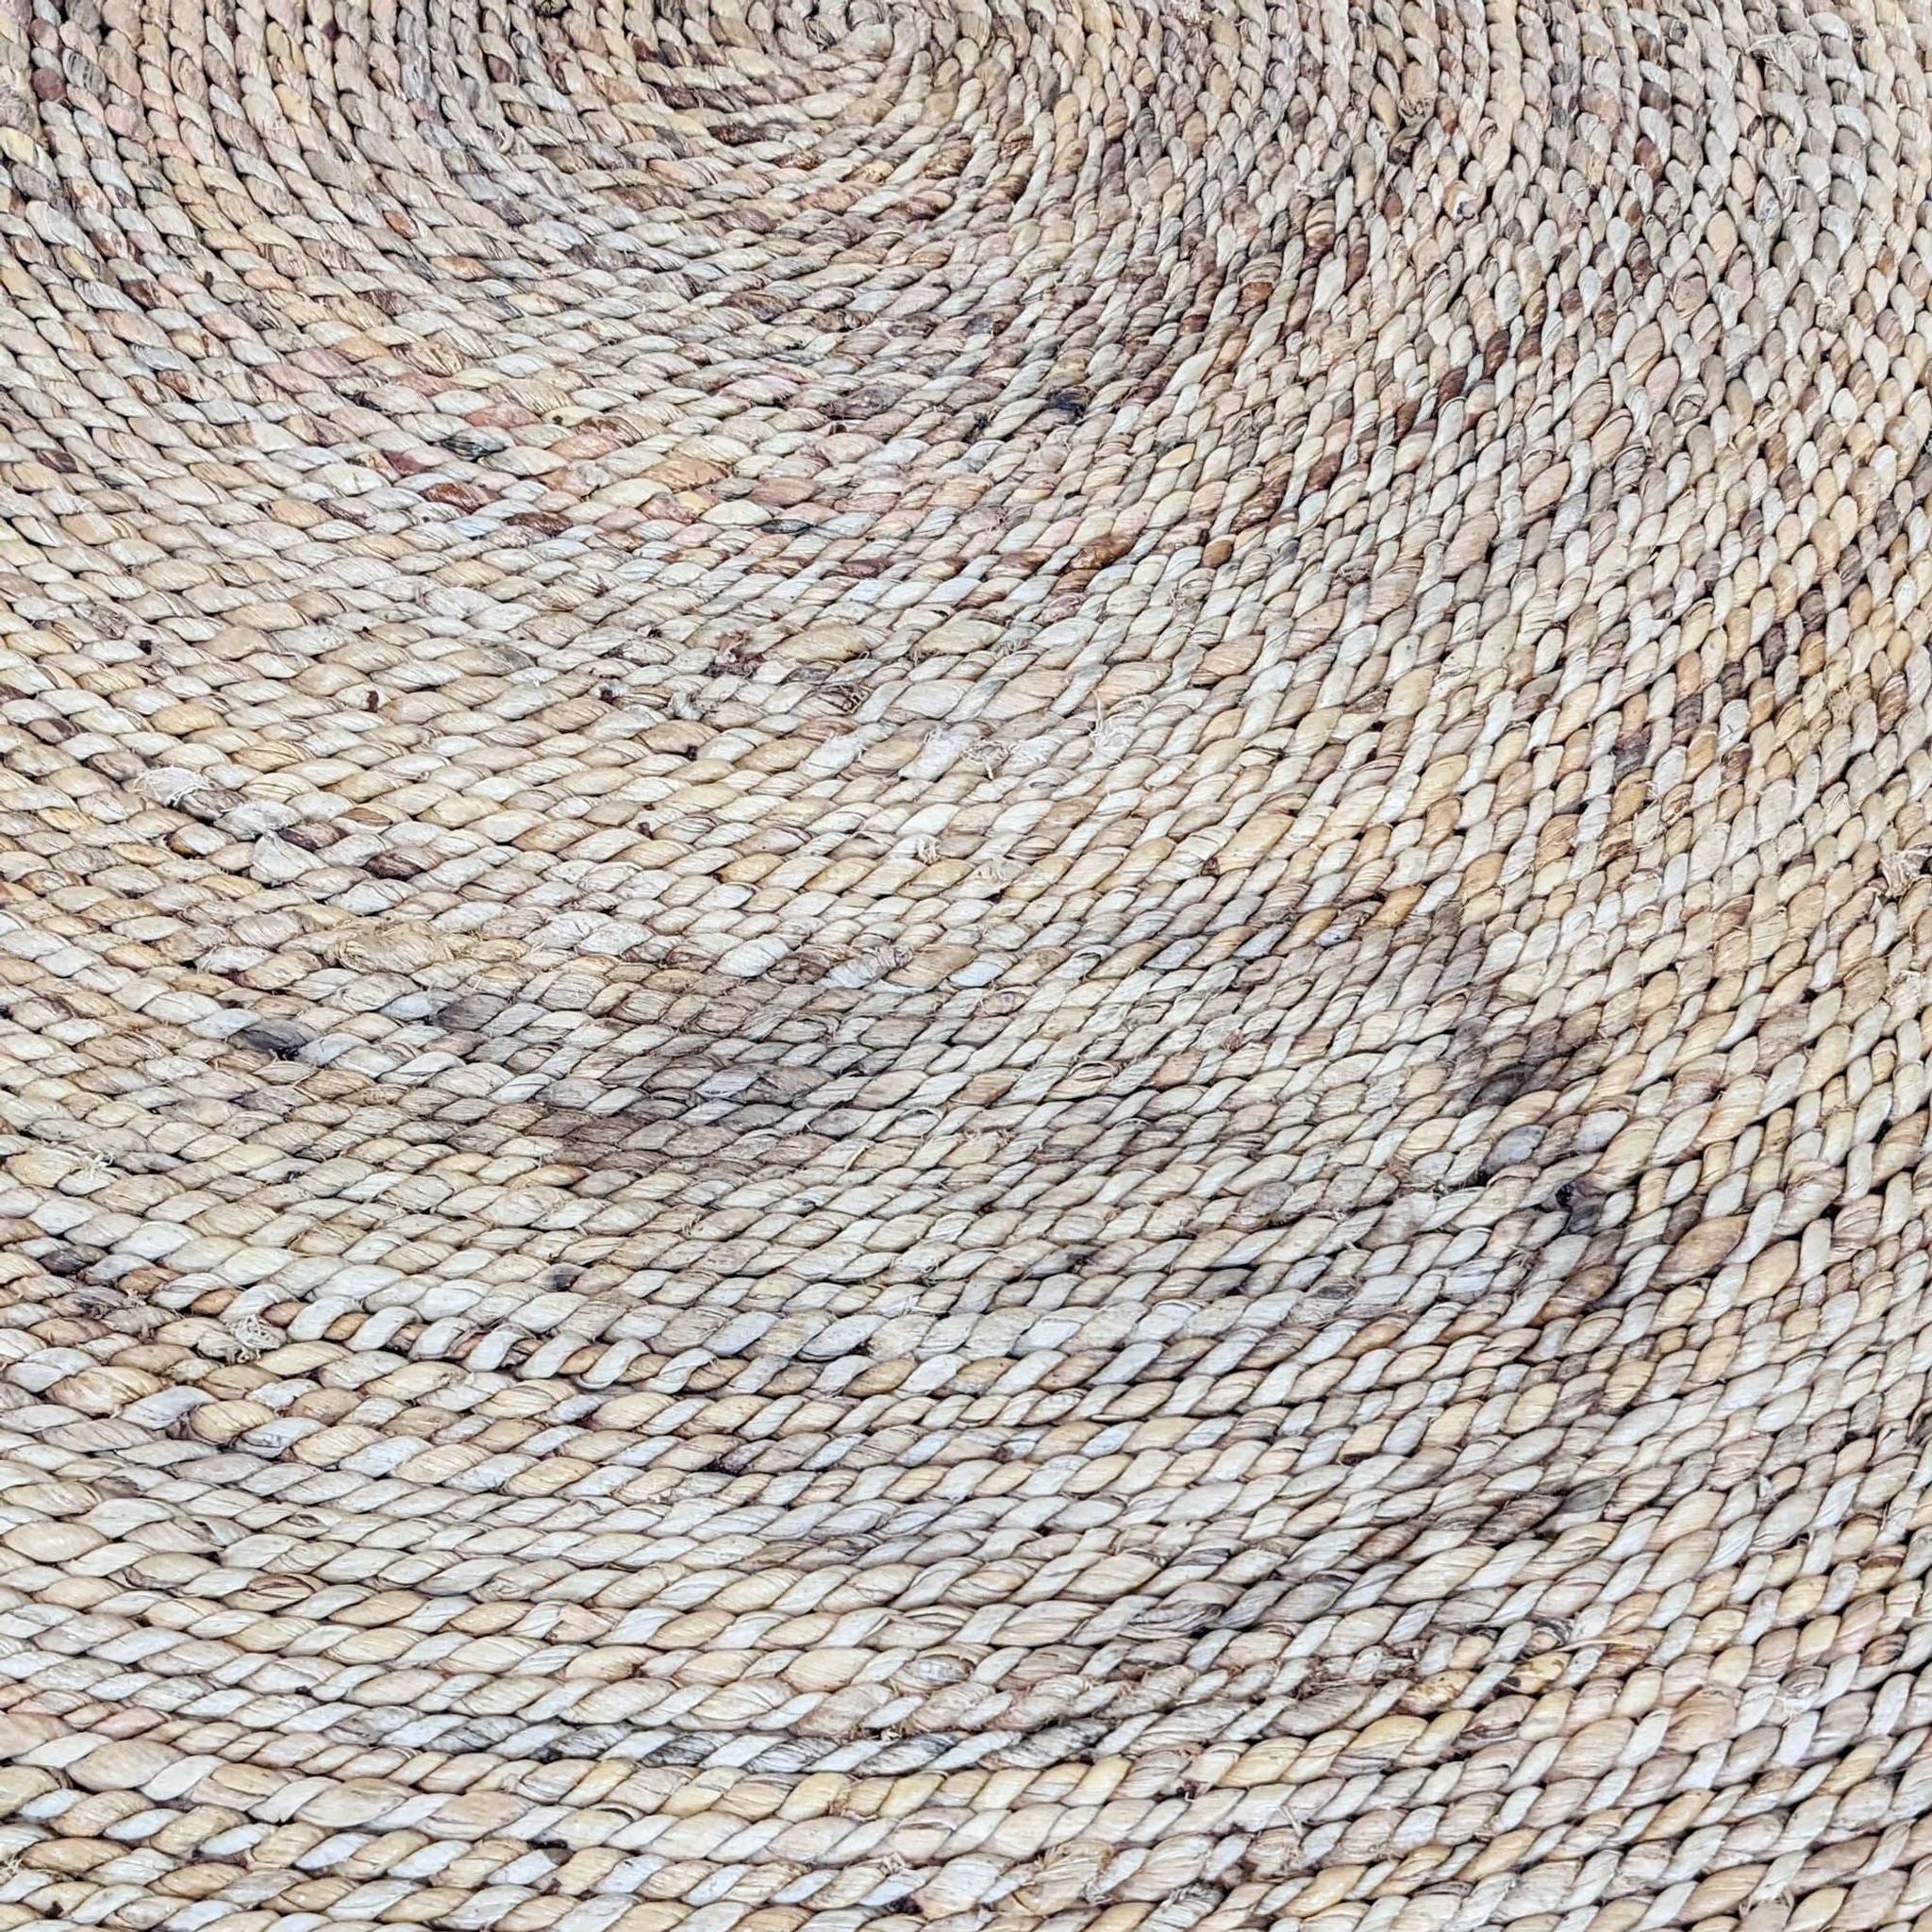 Close-up texture of natural fiber woven surface on Reperch coffee table.